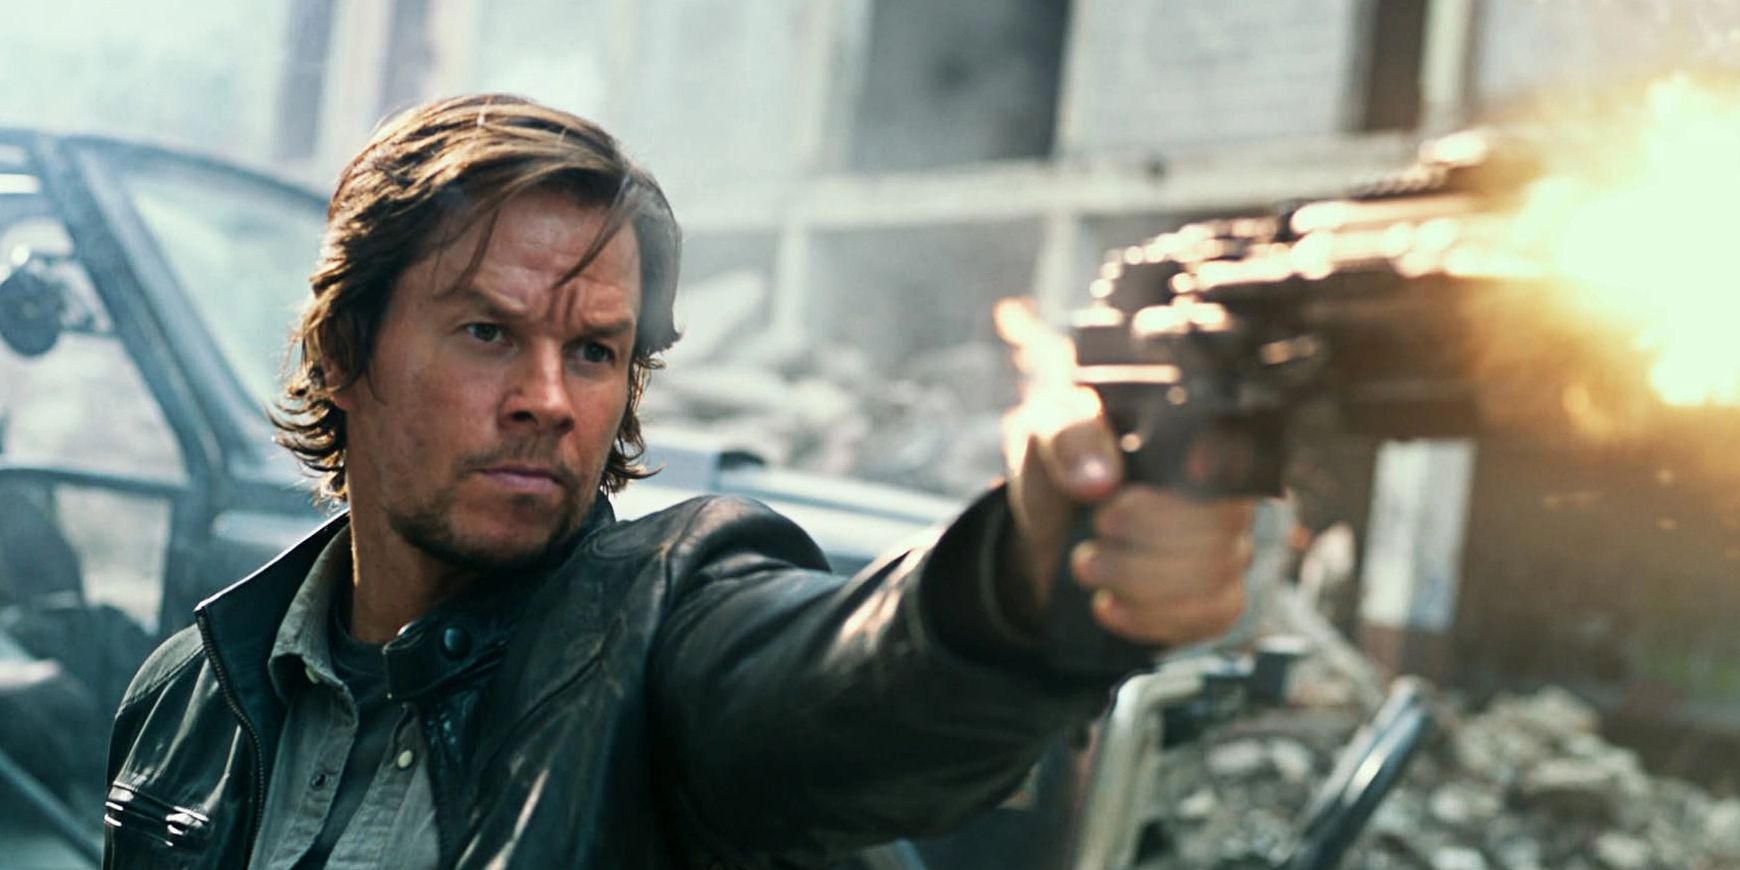 Mark Wahlberg as Cady Yeager in Transformers.